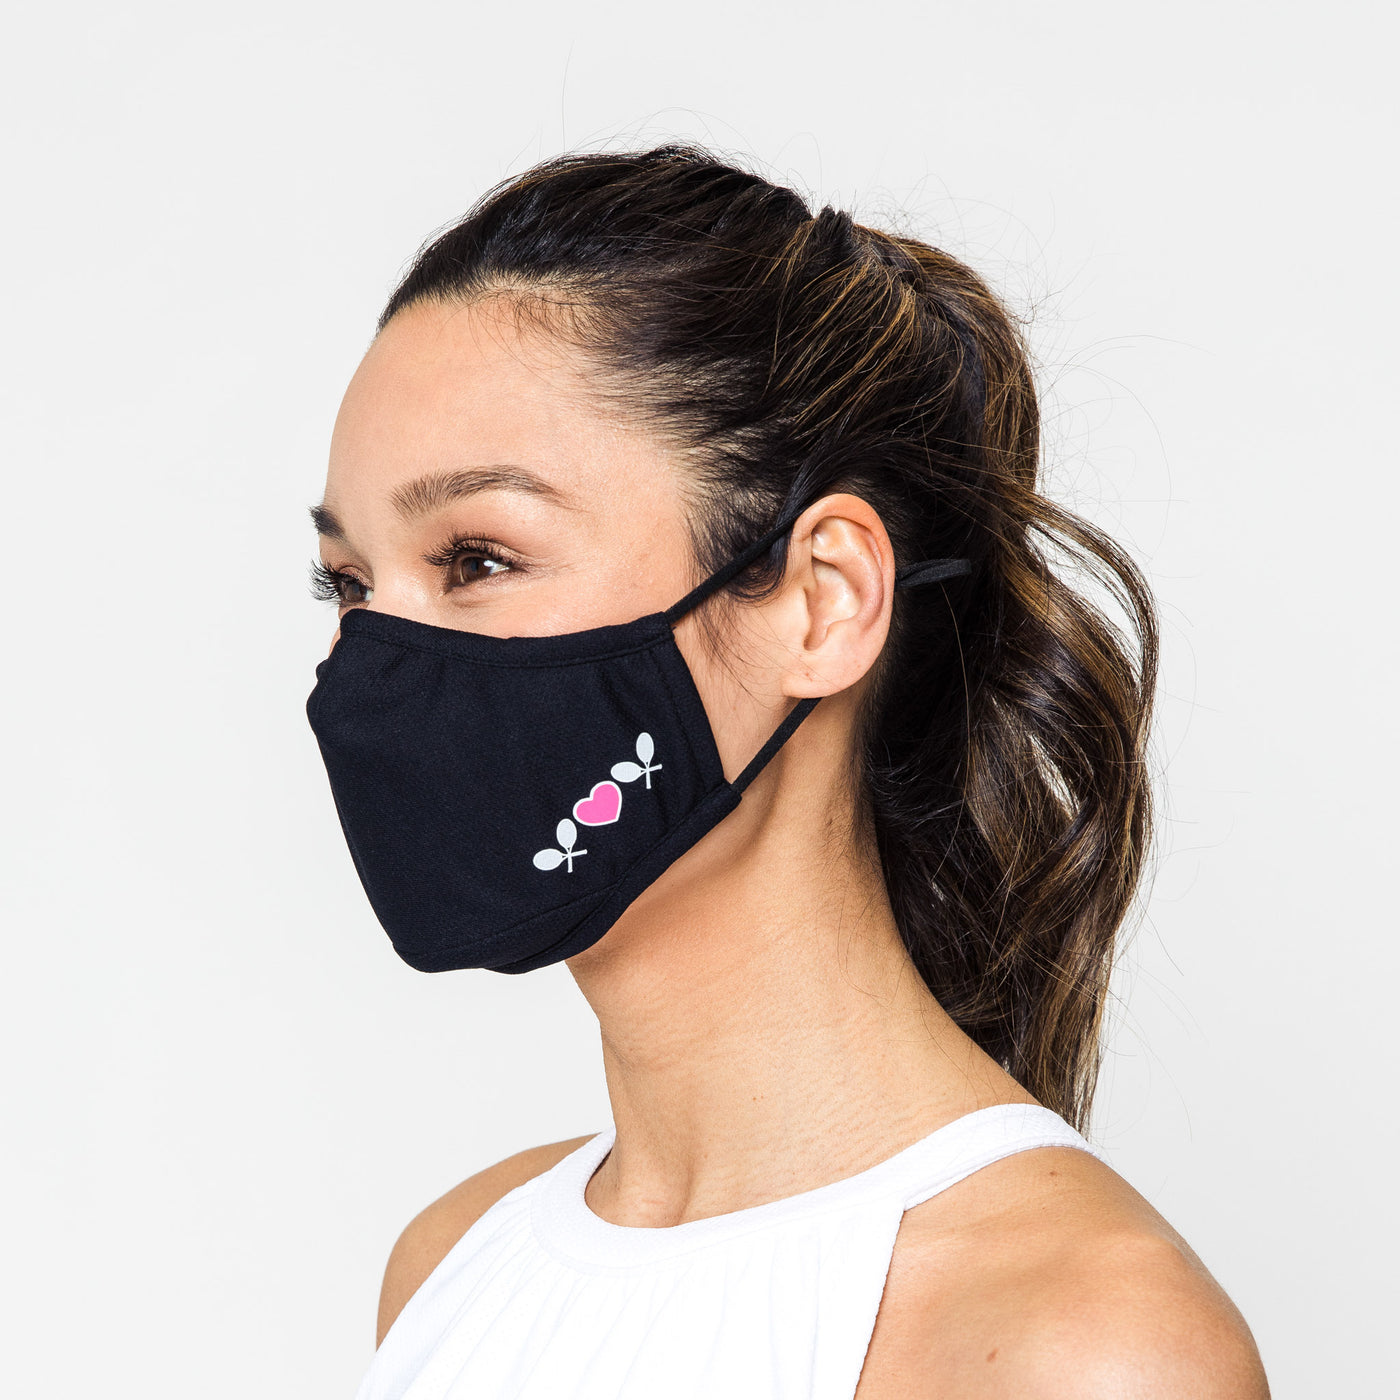 black face mask with white and pink tennis racquets and heart printed on side